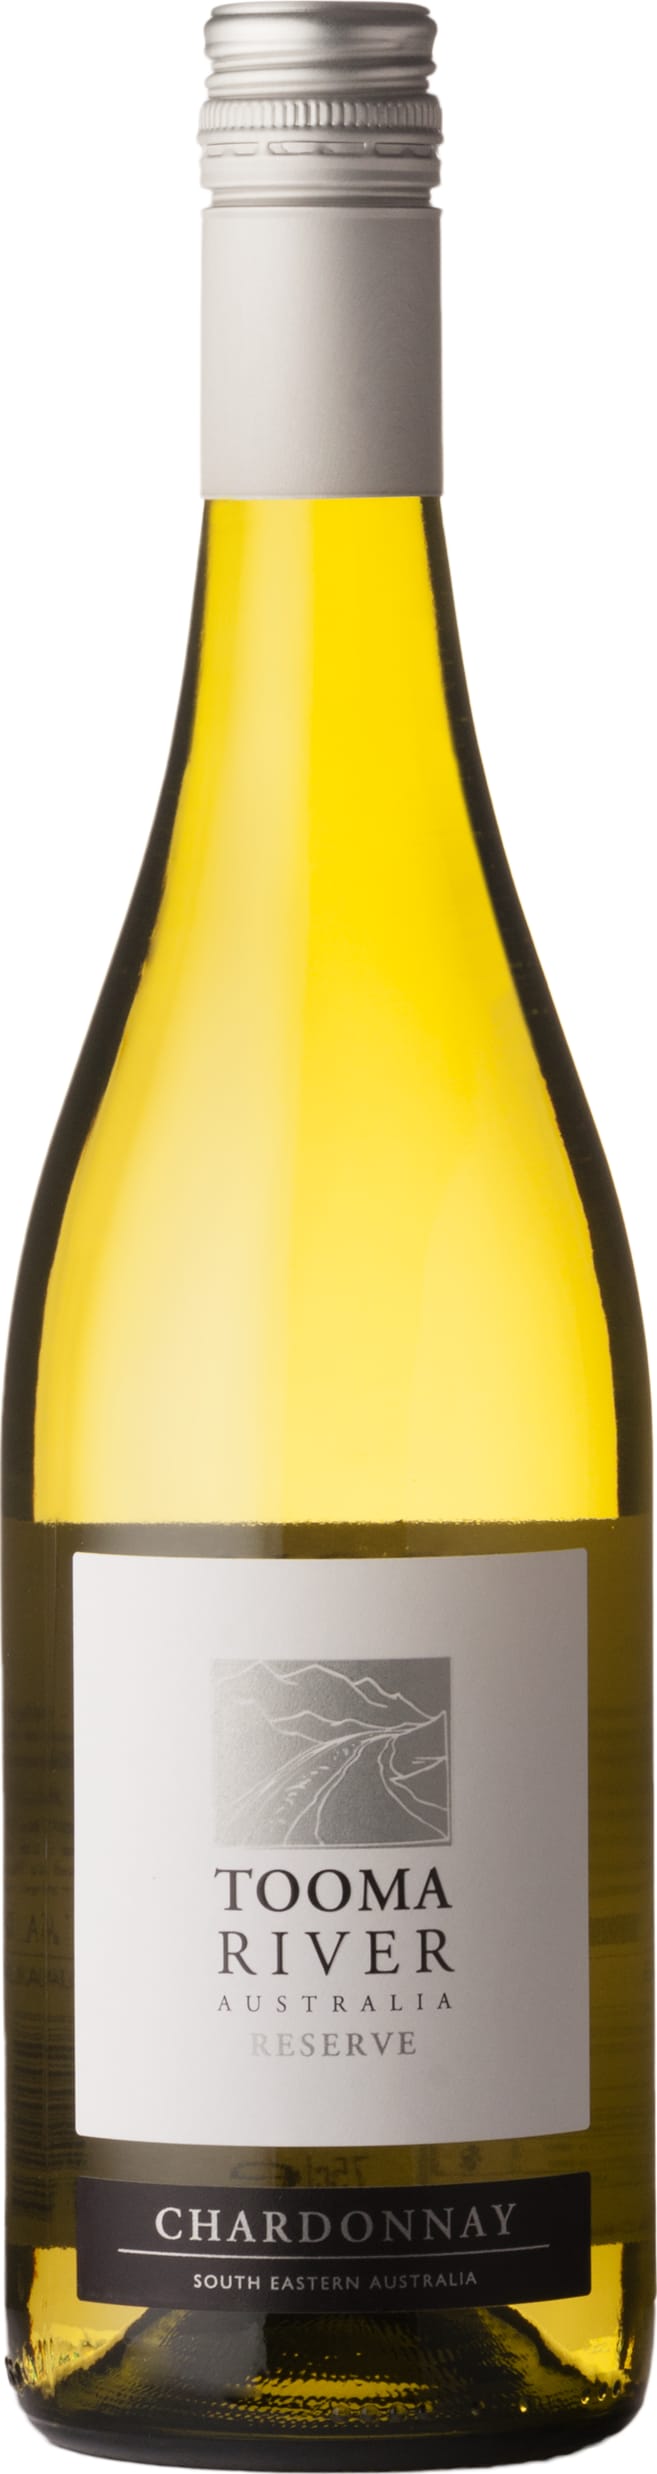 Tooma River Reserve Chardonnay 2023 75cl - Buy Tooma River Wines from GREAT WINES DIRECT wine shop